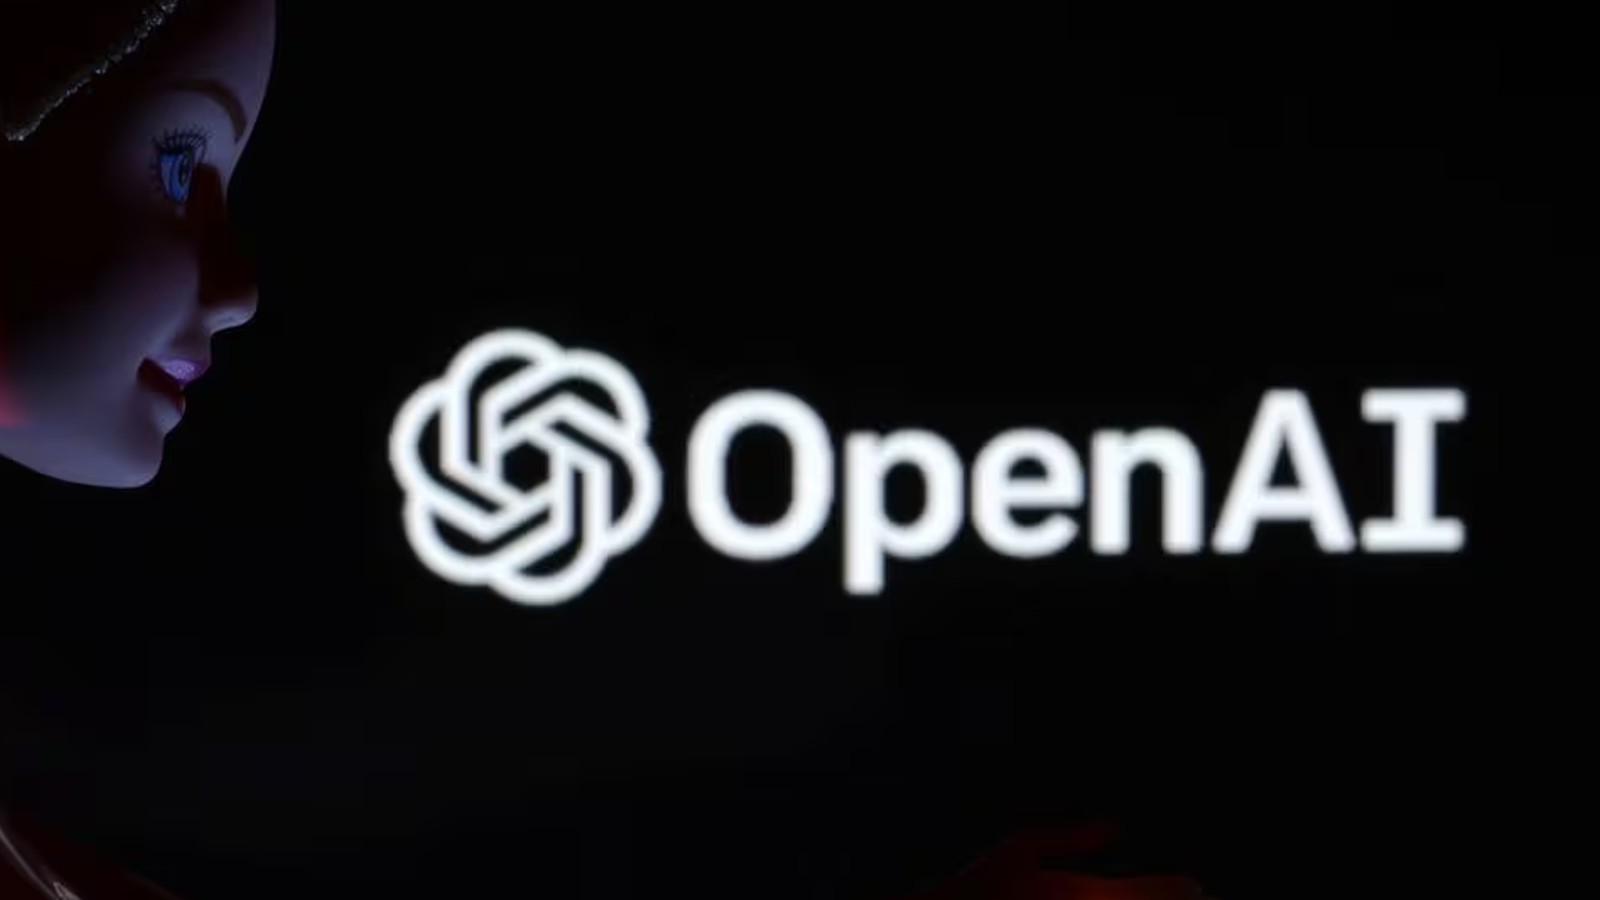 OpenAI CEO Steps Down, Alleges Company Prioritizes ‘Gimmicky Products’ over Safety | Tech Industry Updates